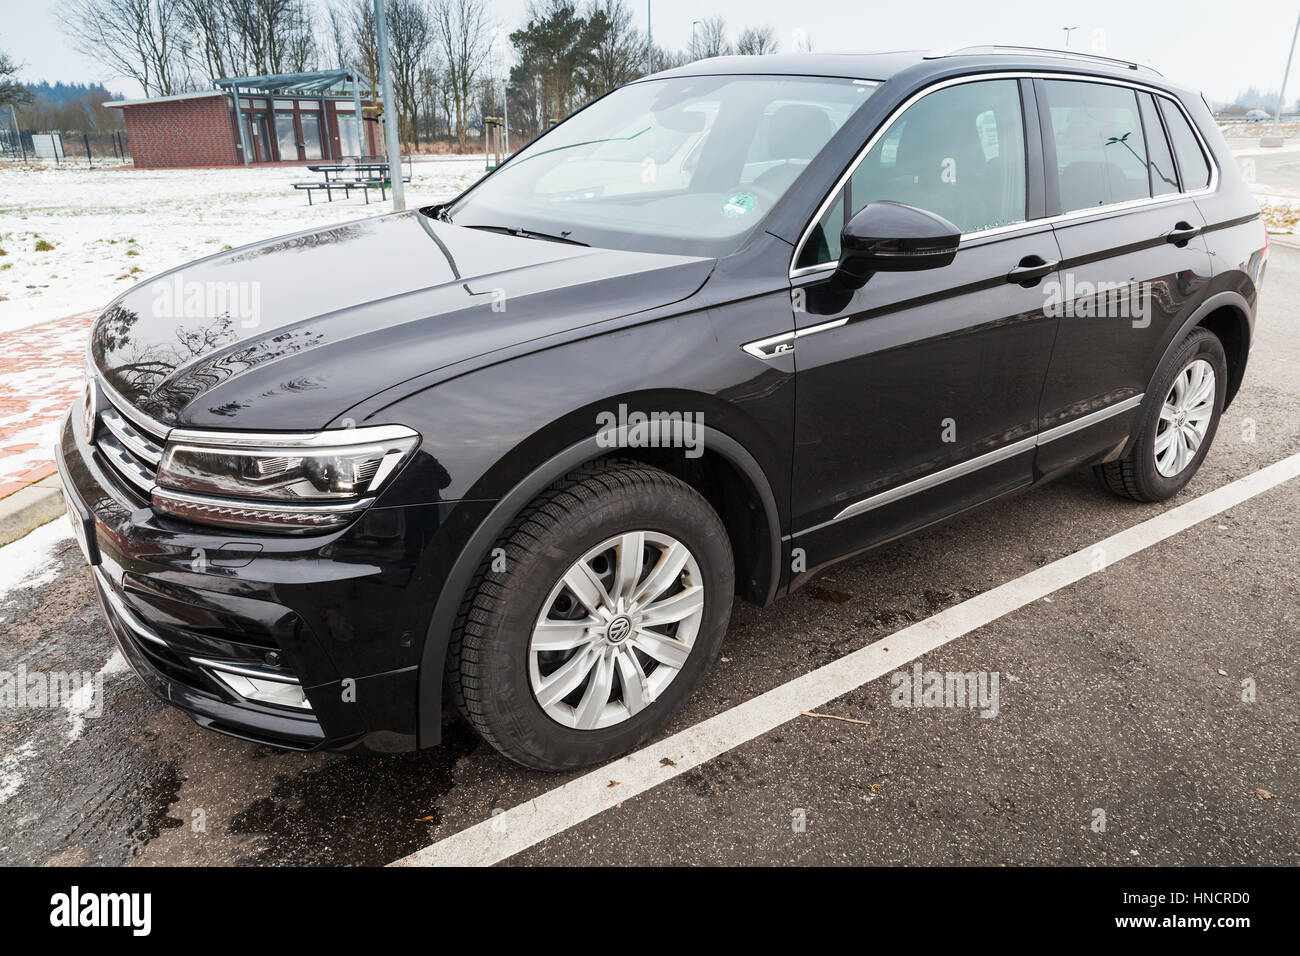 Hamburg, Germany - February 10, 2017: Outdoor photo of second generation Volkswagen Tiguan, R-Line. Black compact crossover vehicle CUV manufactured b Stock Photo